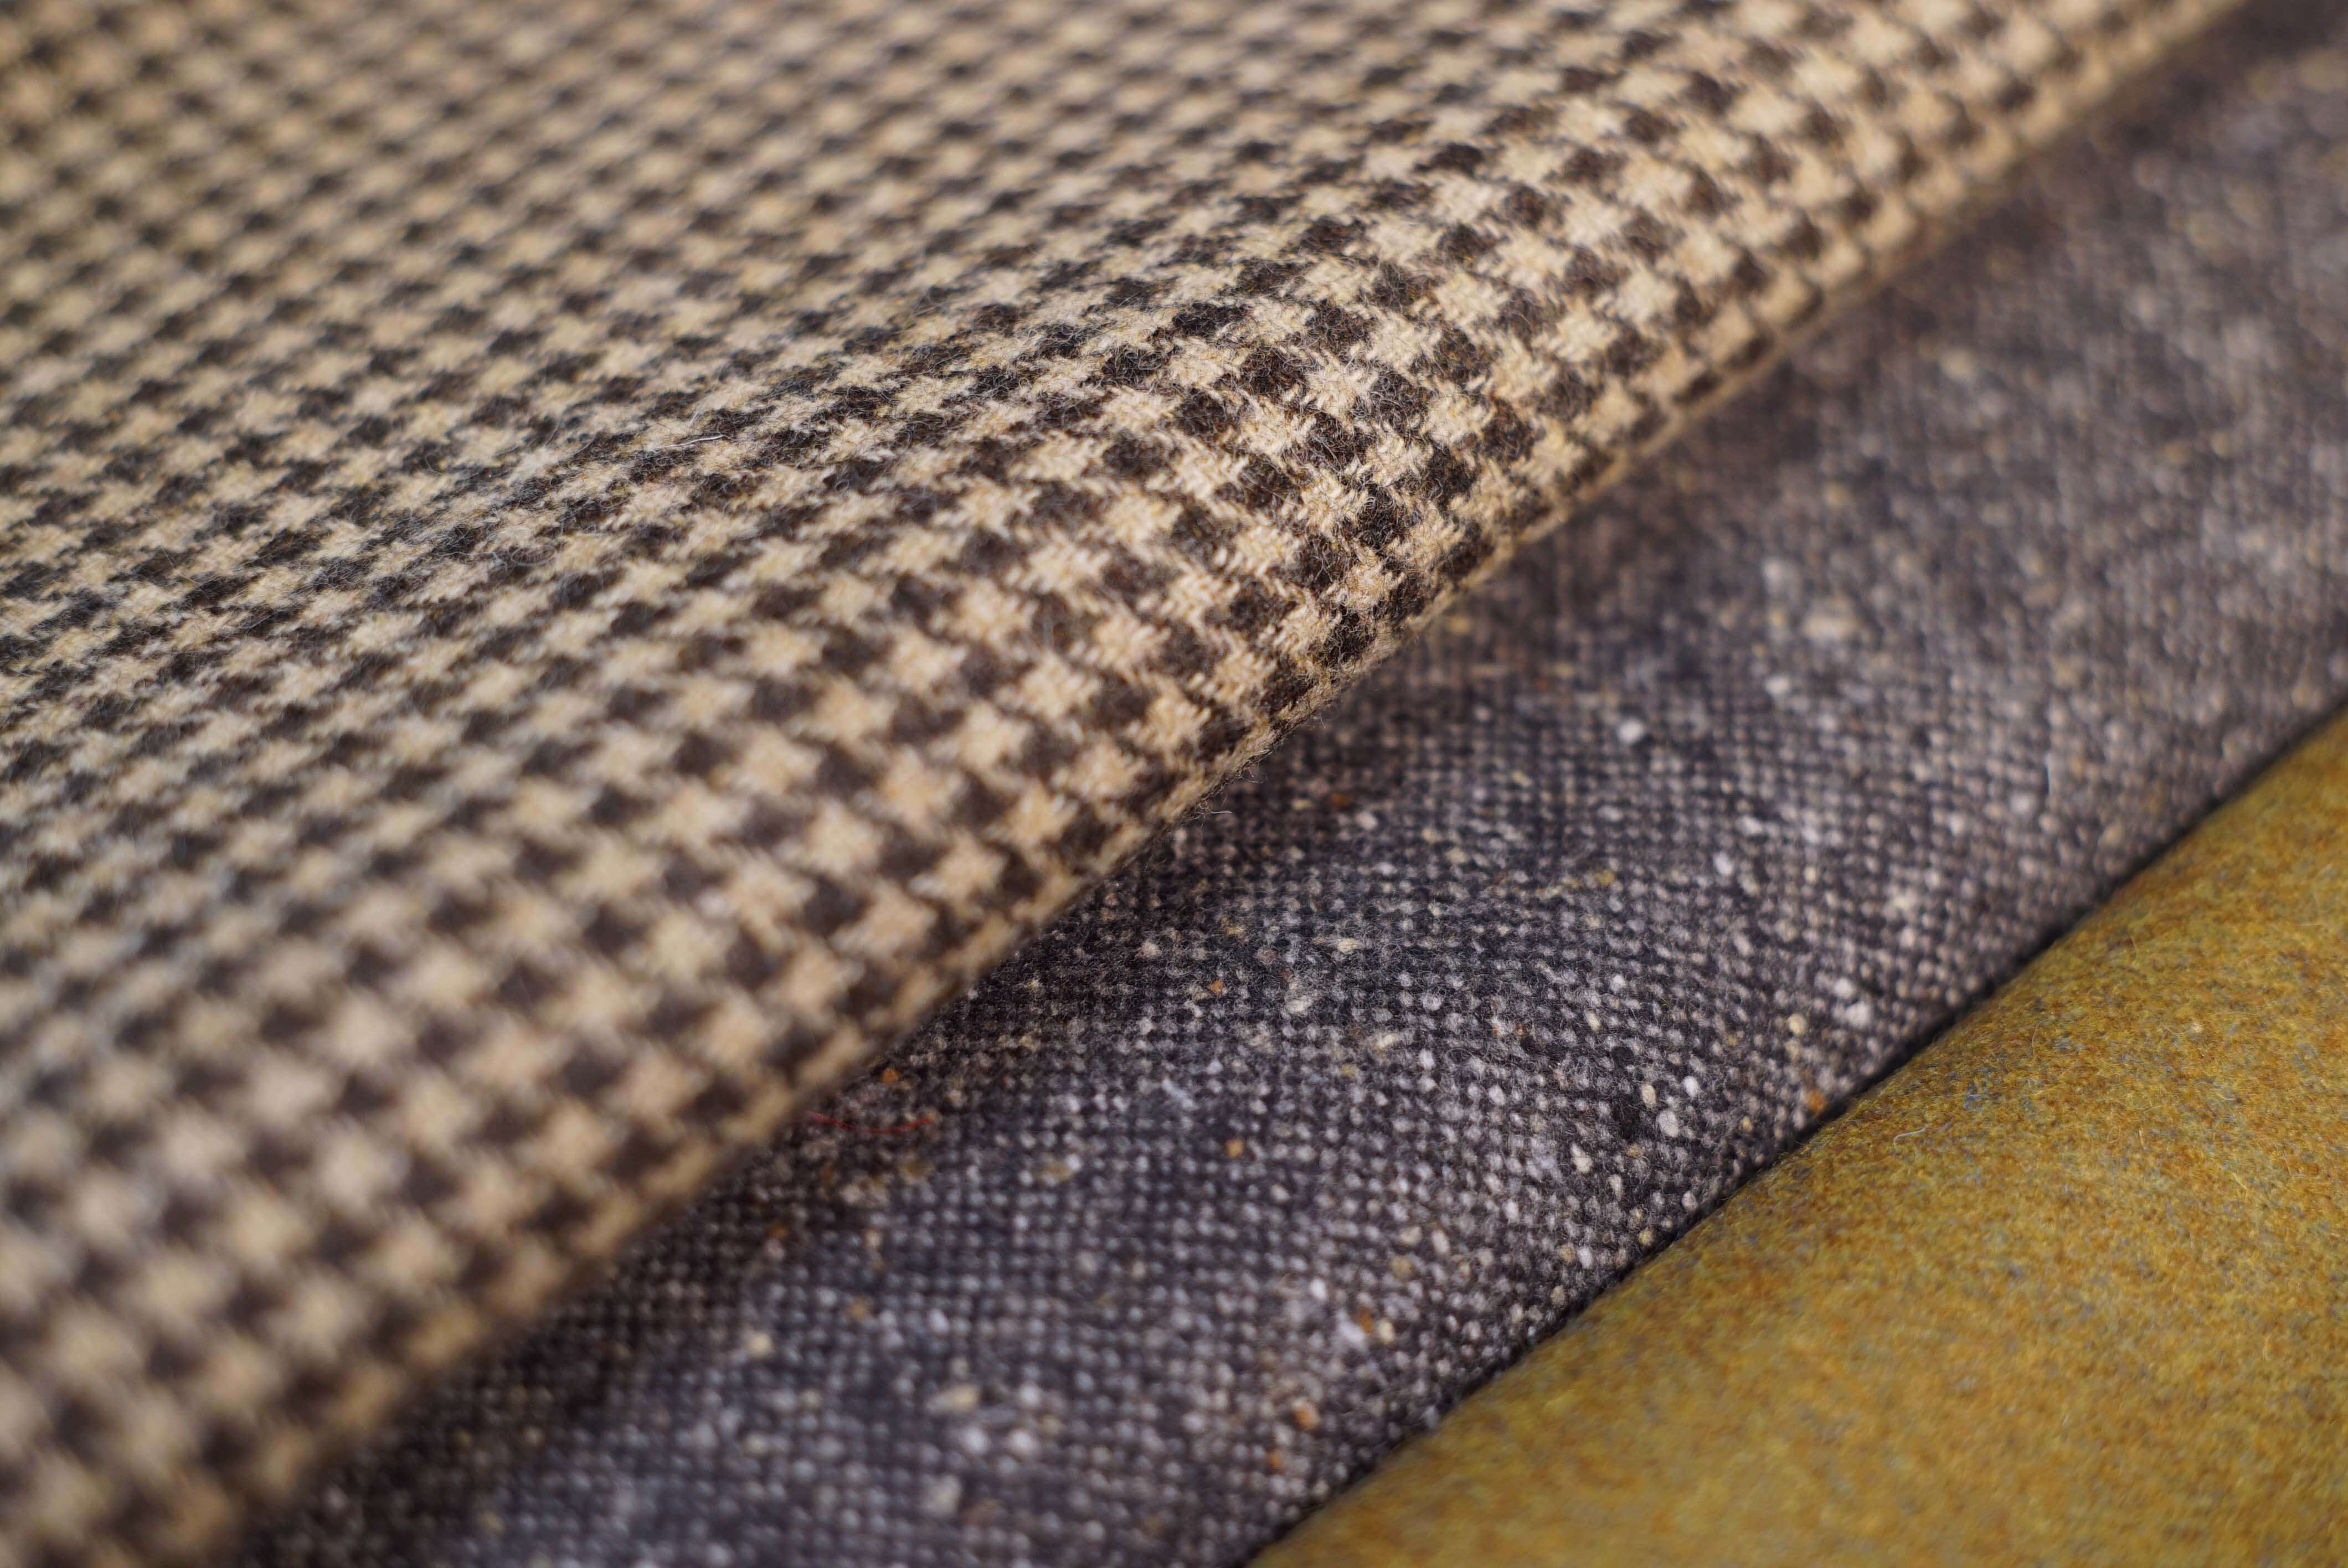 How (and Why) to Order Bespoke Harris Tweed – Robb Report